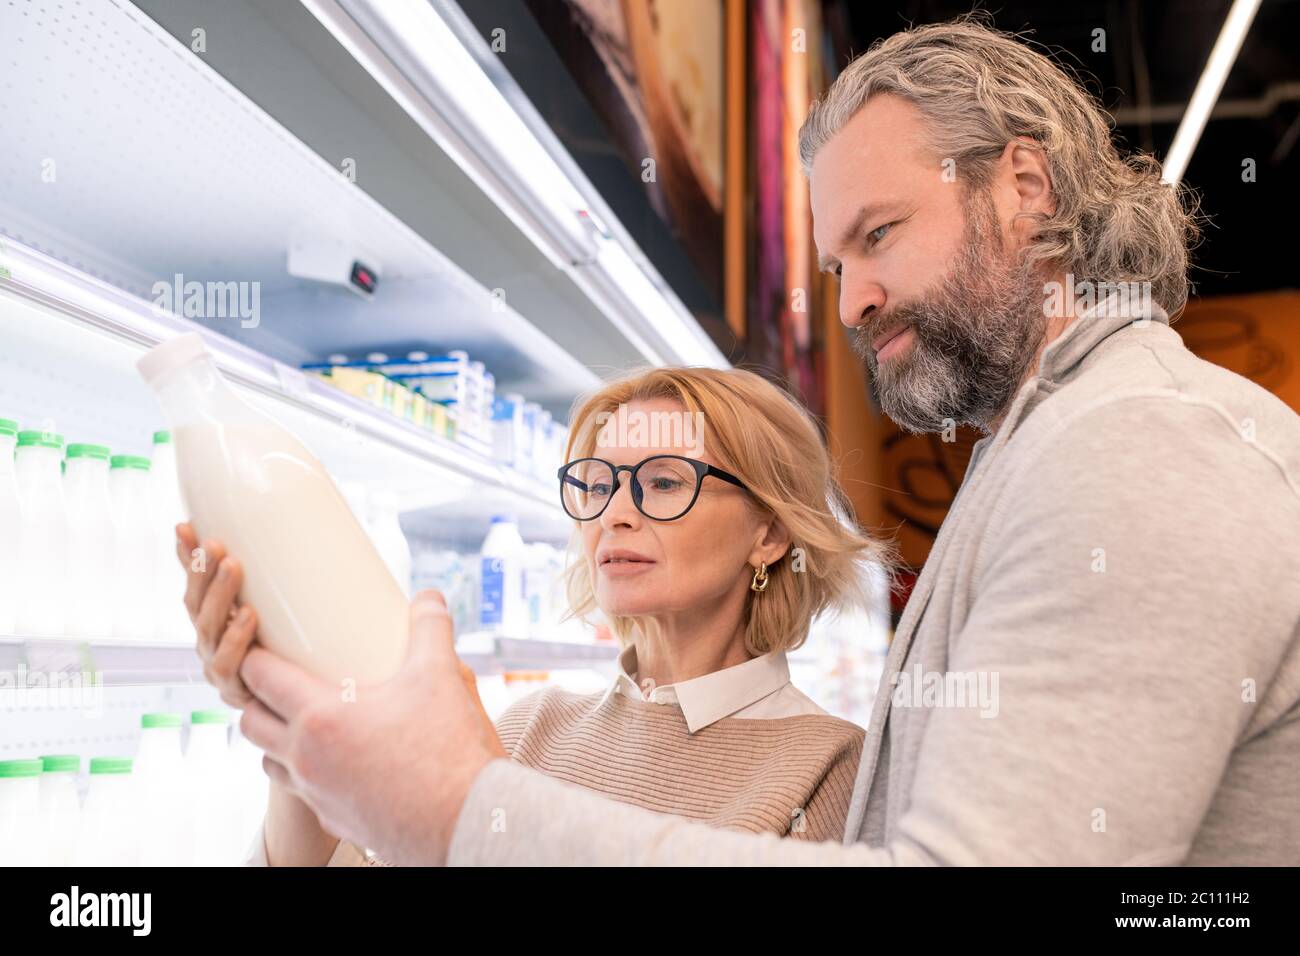 Aged serious bearded man and his blond wife choosing milk on display with dairy products while standing by shelves with bottles Stock Photo